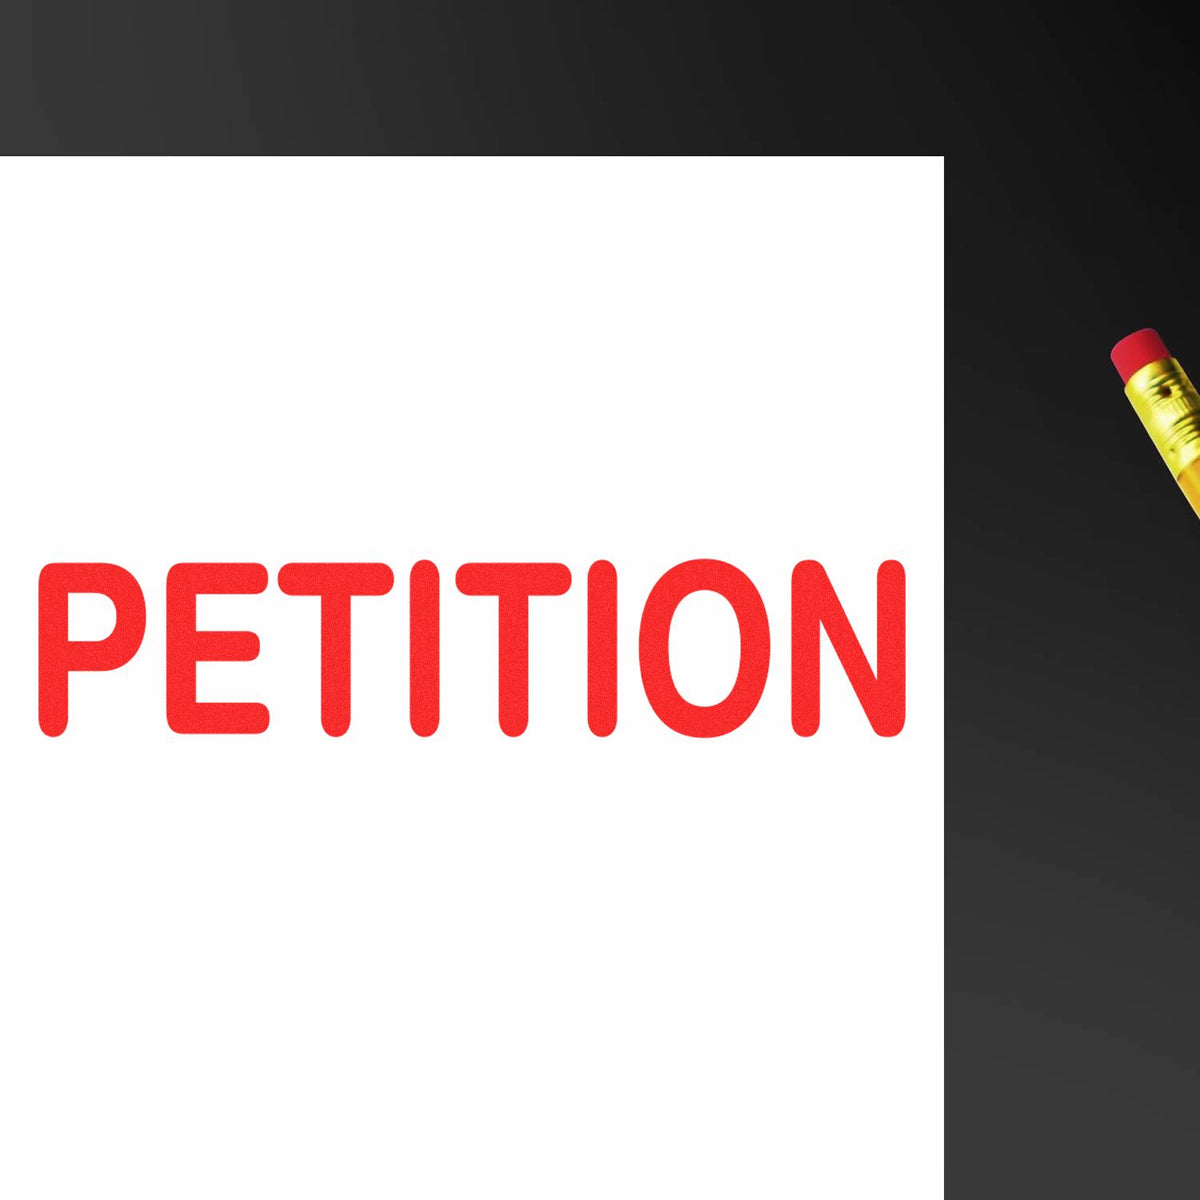 Large Petition Rubber Stamp In Use Photo